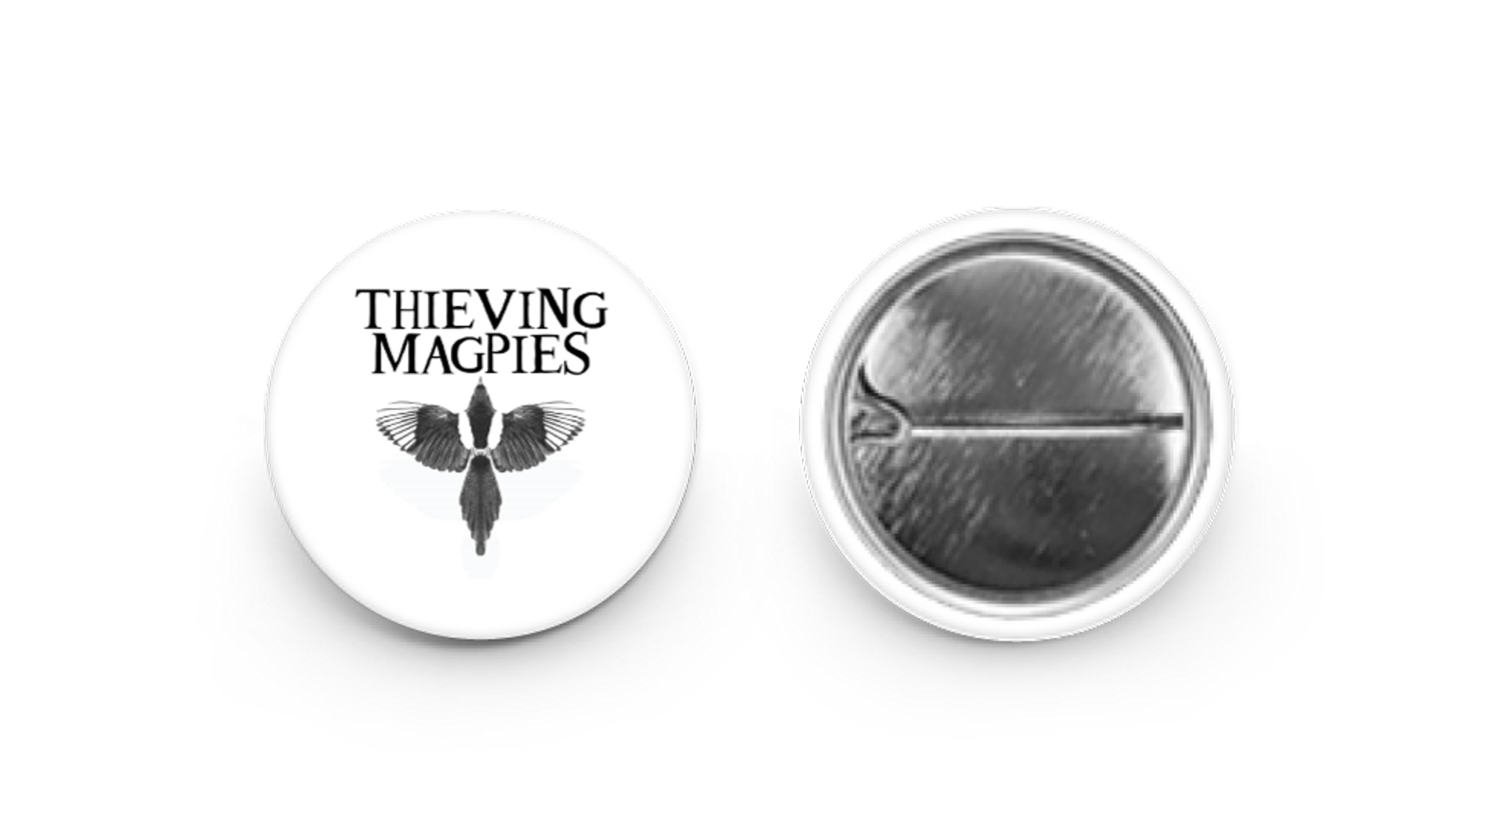 Thieving Magpies Badge (Pin/Button)